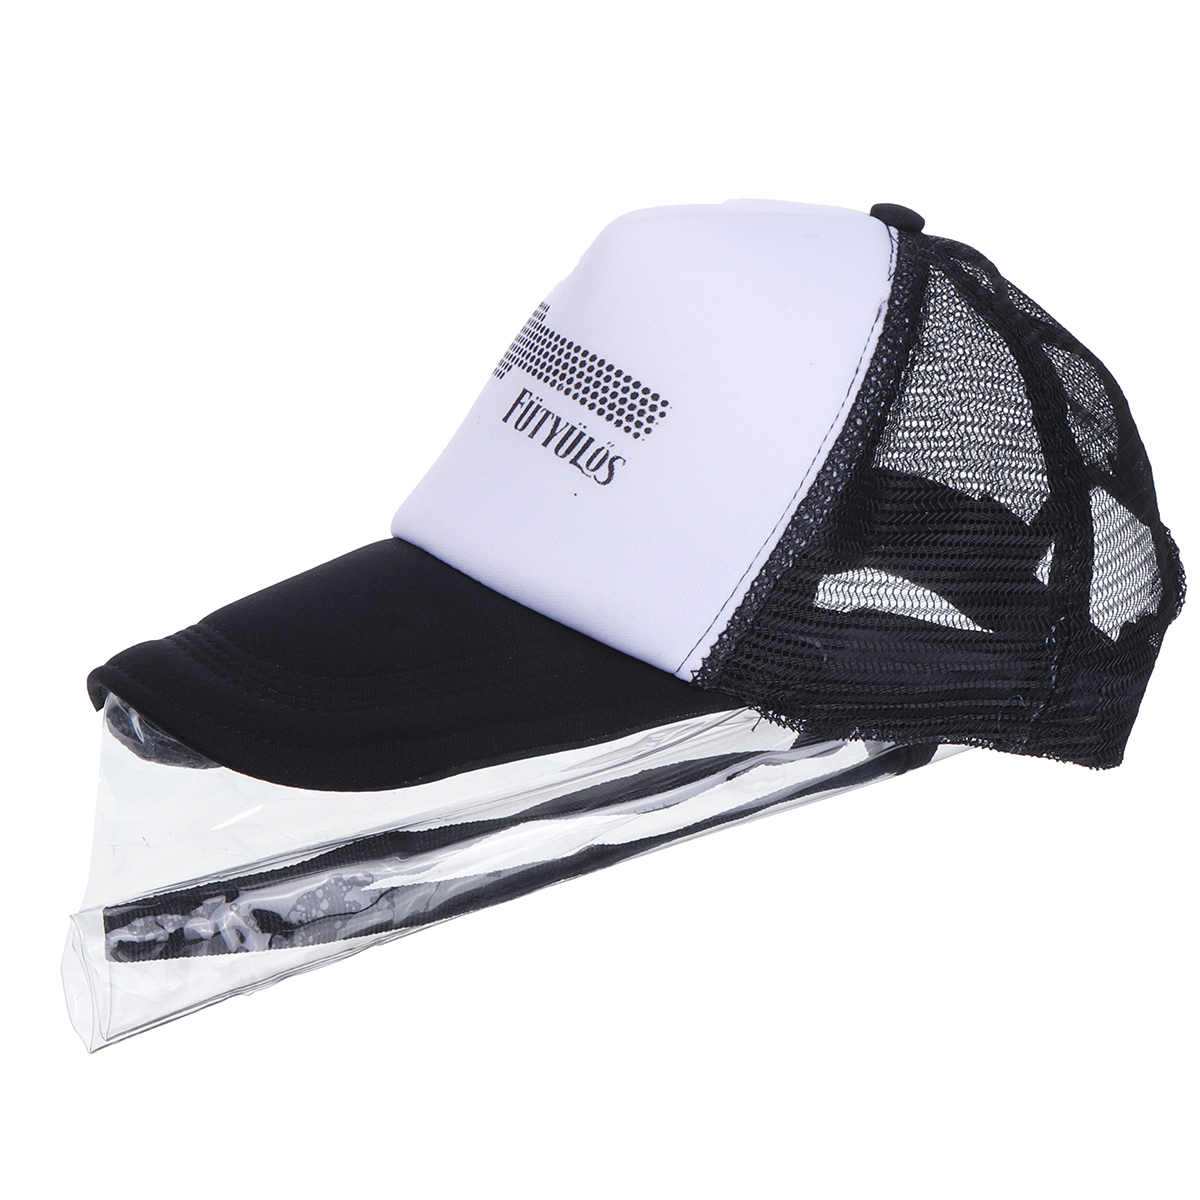 Anti-spitting-Protective-Hat-Dustproof-Cover-Peaked-Cap-Fisherman-Sun-protection-1659915-2